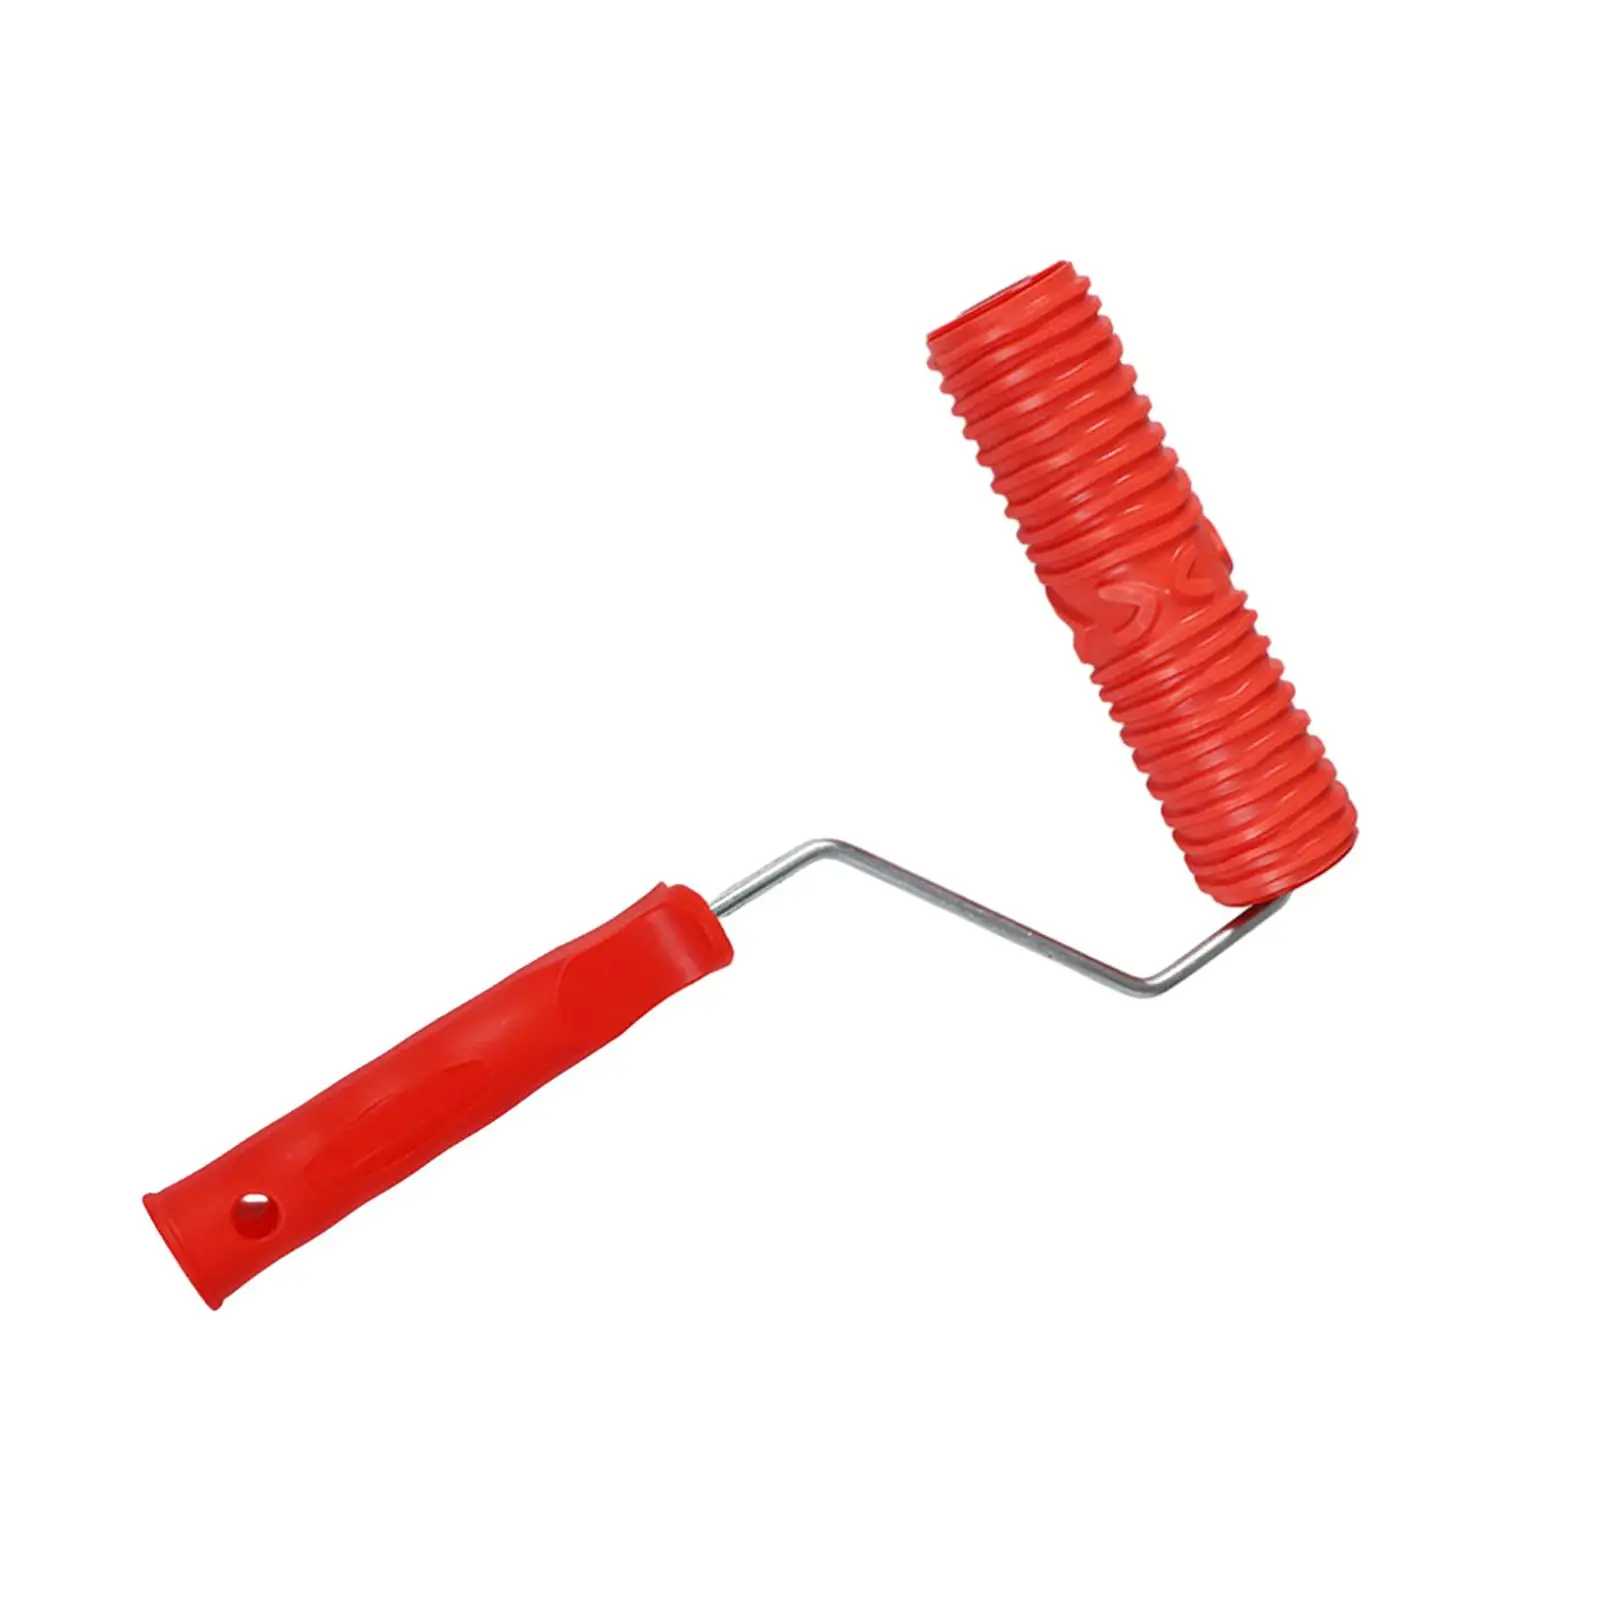 180mm Texture Rubber Paint Roller Brush Decorative Tool with PP Handle Smooth Rolling Accessory for Household Use Red Durable